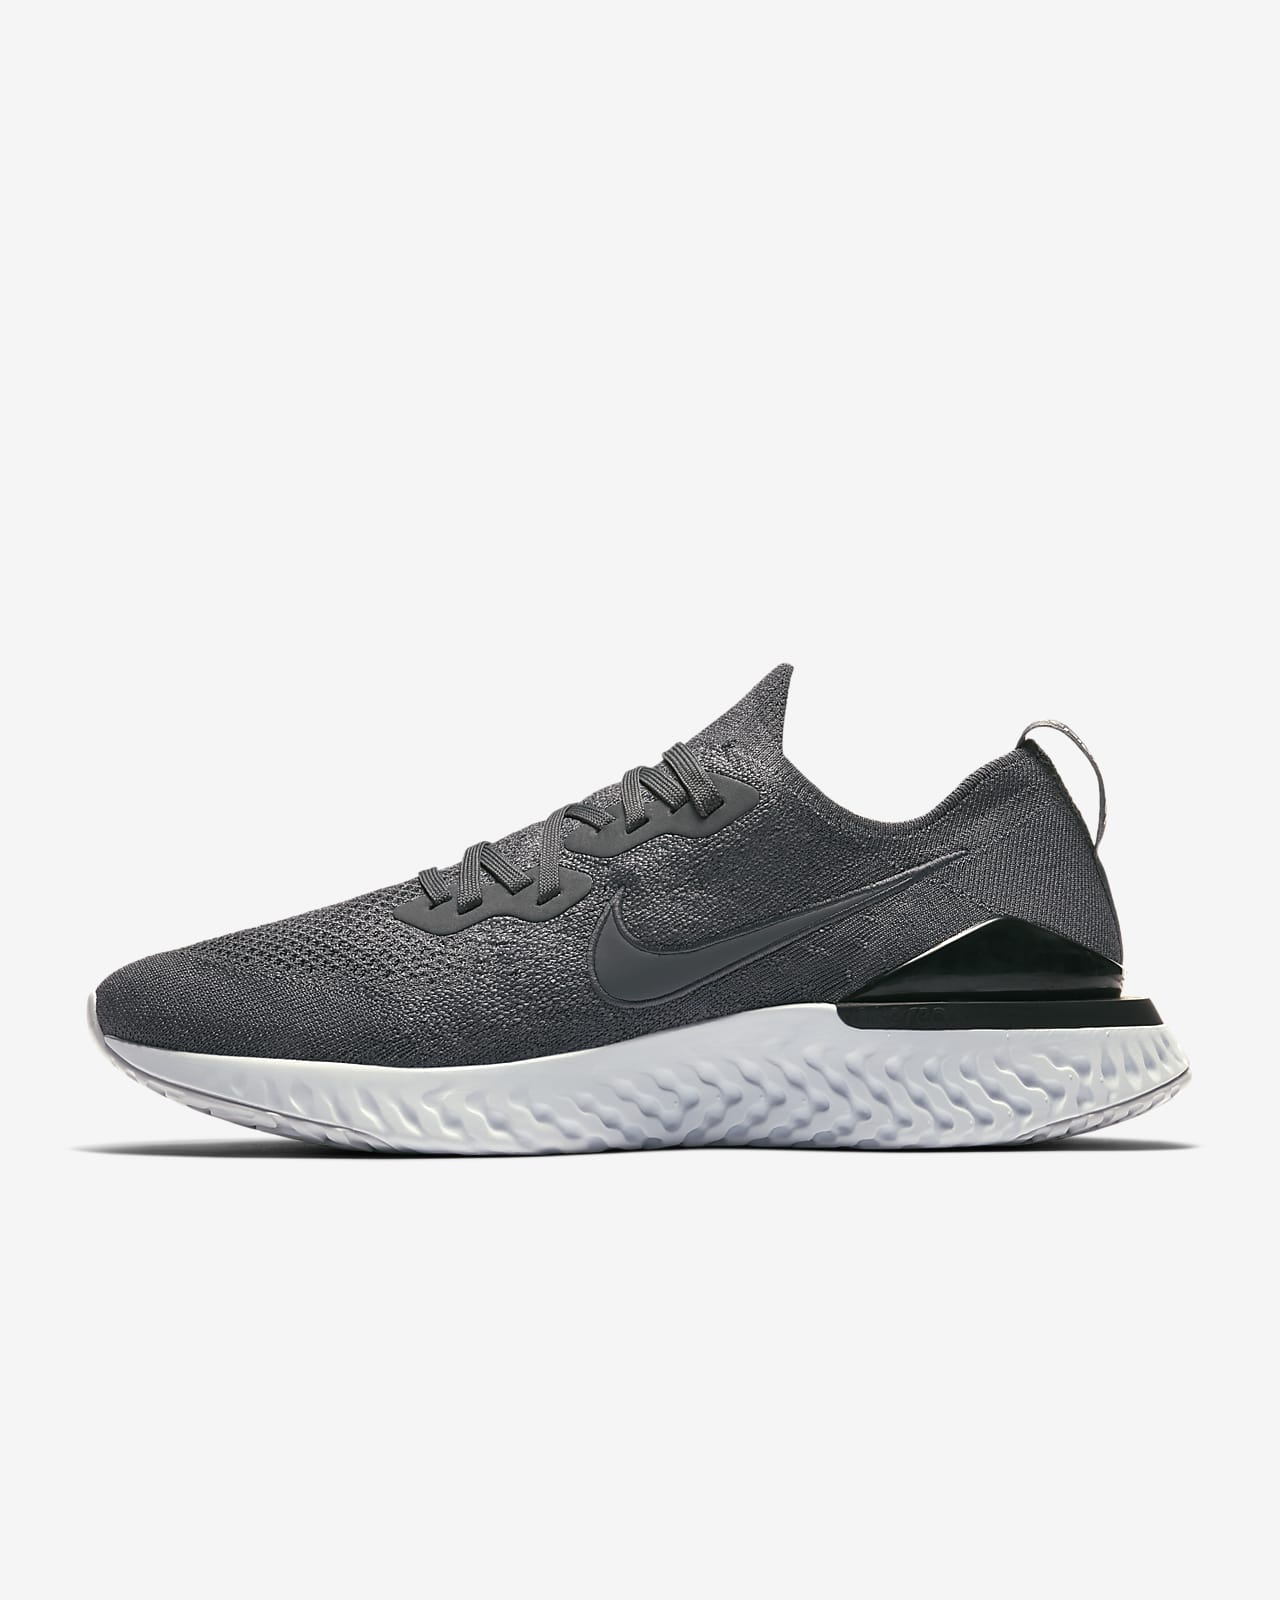 Chaussure de running Nike Epic React Flyknit 2 pour homme